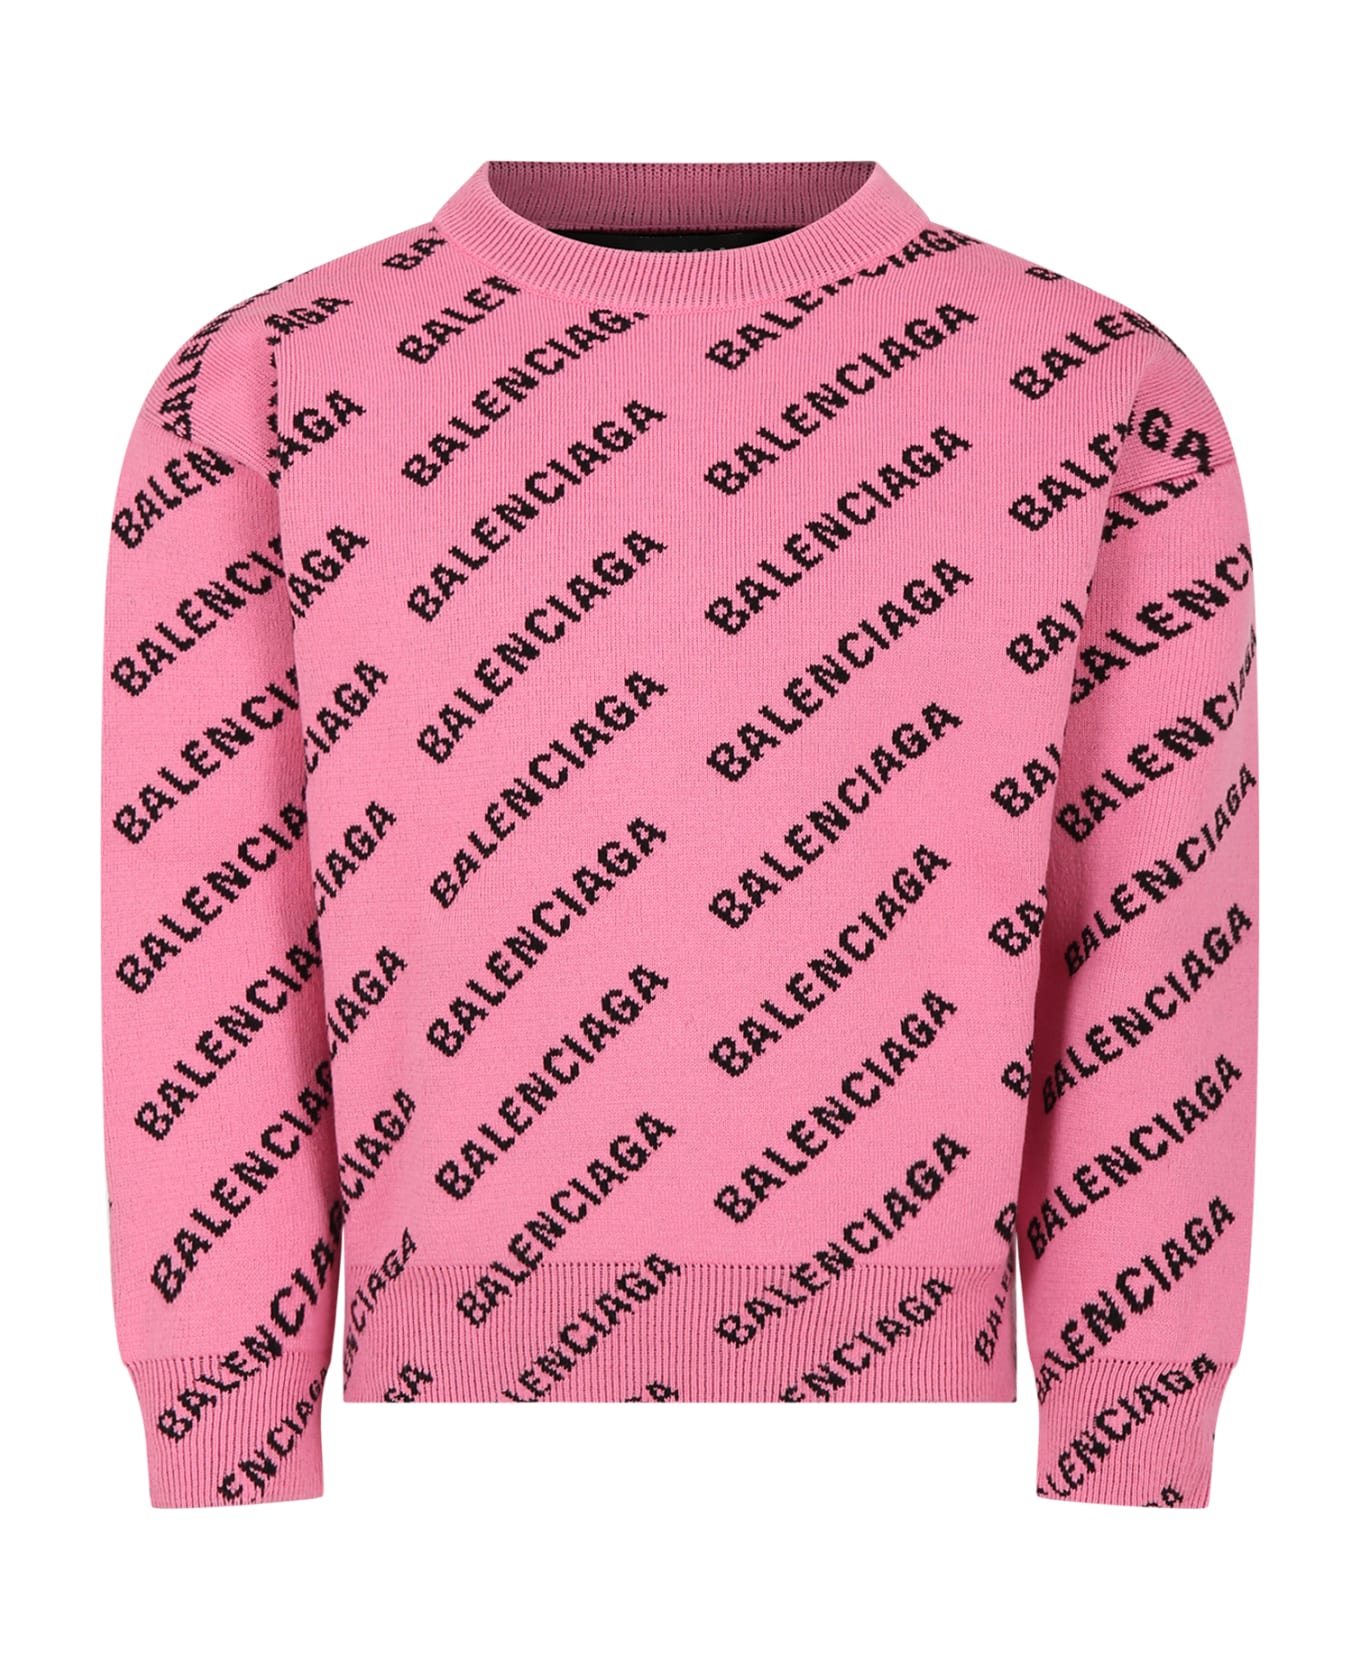 Balenciaga Pink Sweater For Kids With Logo - Pink